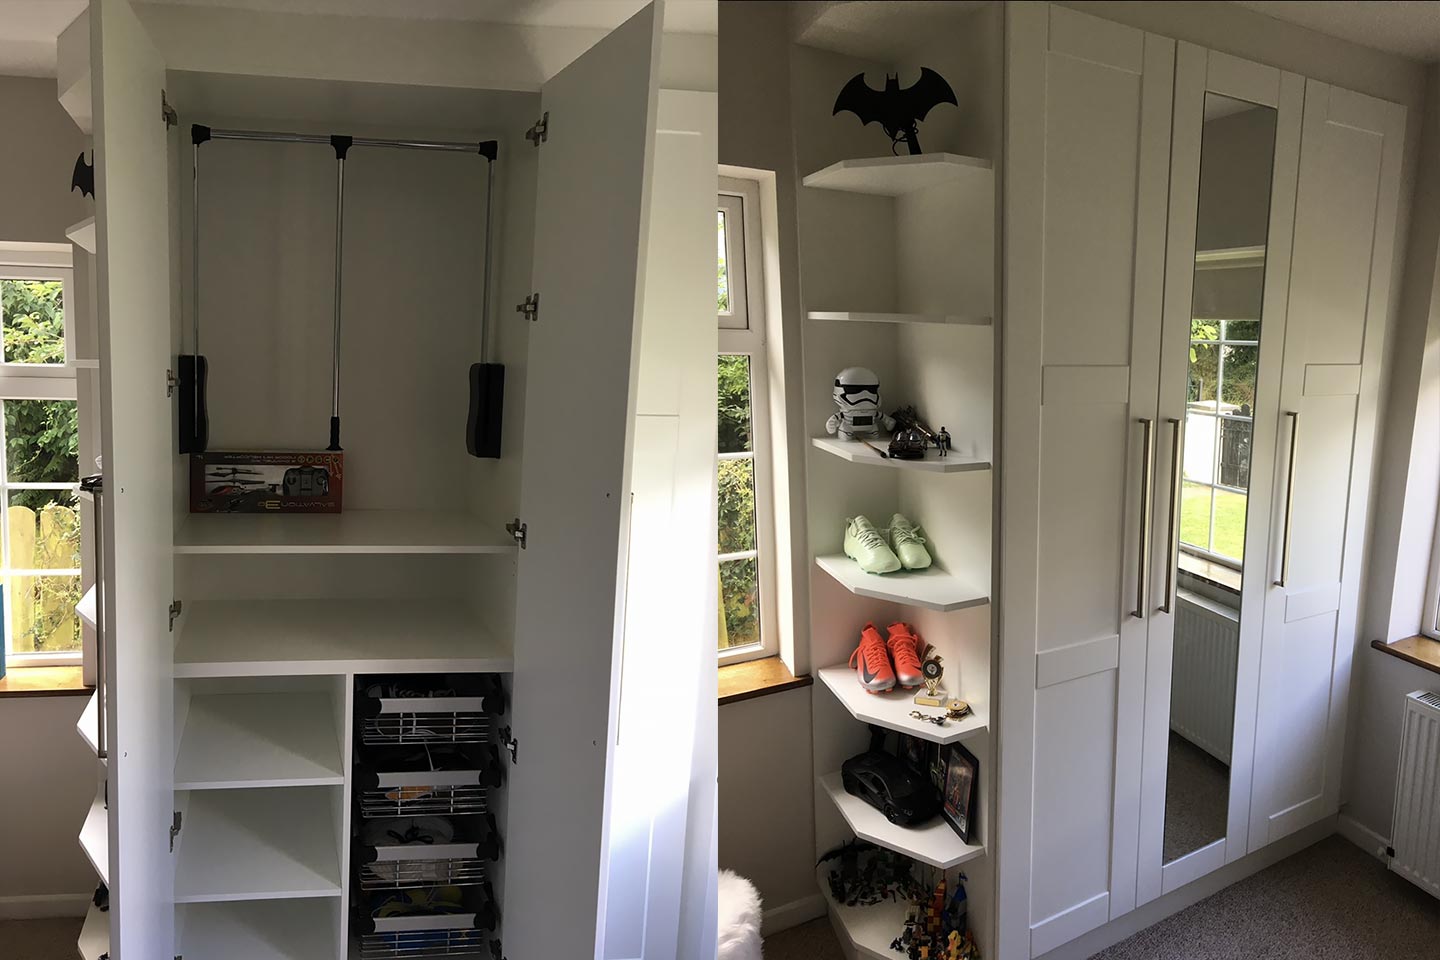 Floor to ceiling wardrobe with pull down hanging bar, wire baskets,  shelving and angles corner shelves.